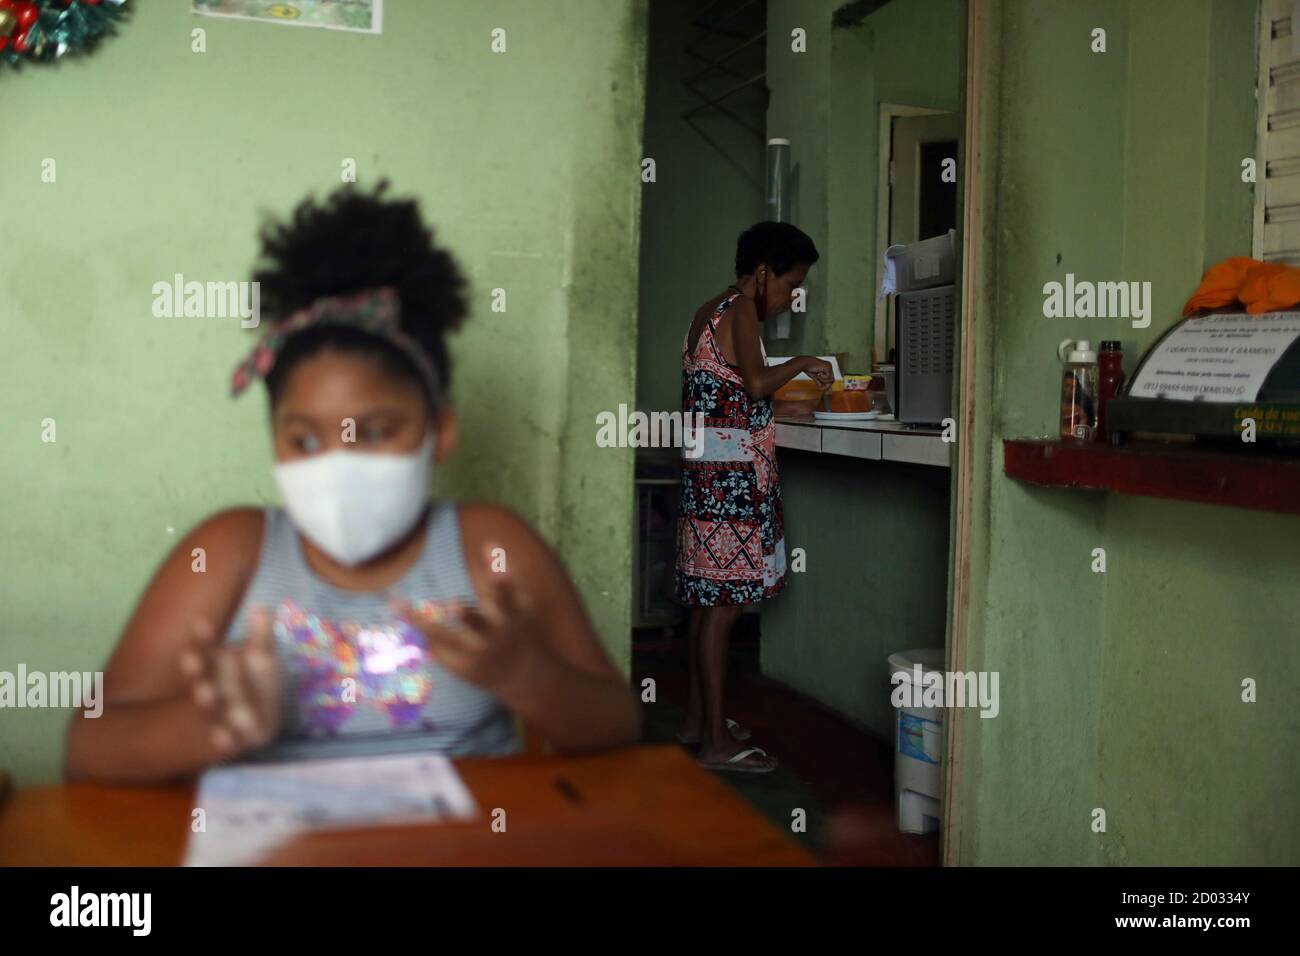 Rebecca Sabino, 8, does her homework as part of the Educacao na Quarentena project (Quarantine Education), as public schools are still closed, while a person waits for food at her family's snack bar at Prazeres slum in Rio de Janeiro, Brazil October 1, 2020. Picture taken October 1, 2020. REUTERS/Pilar Olivares Stock Photo